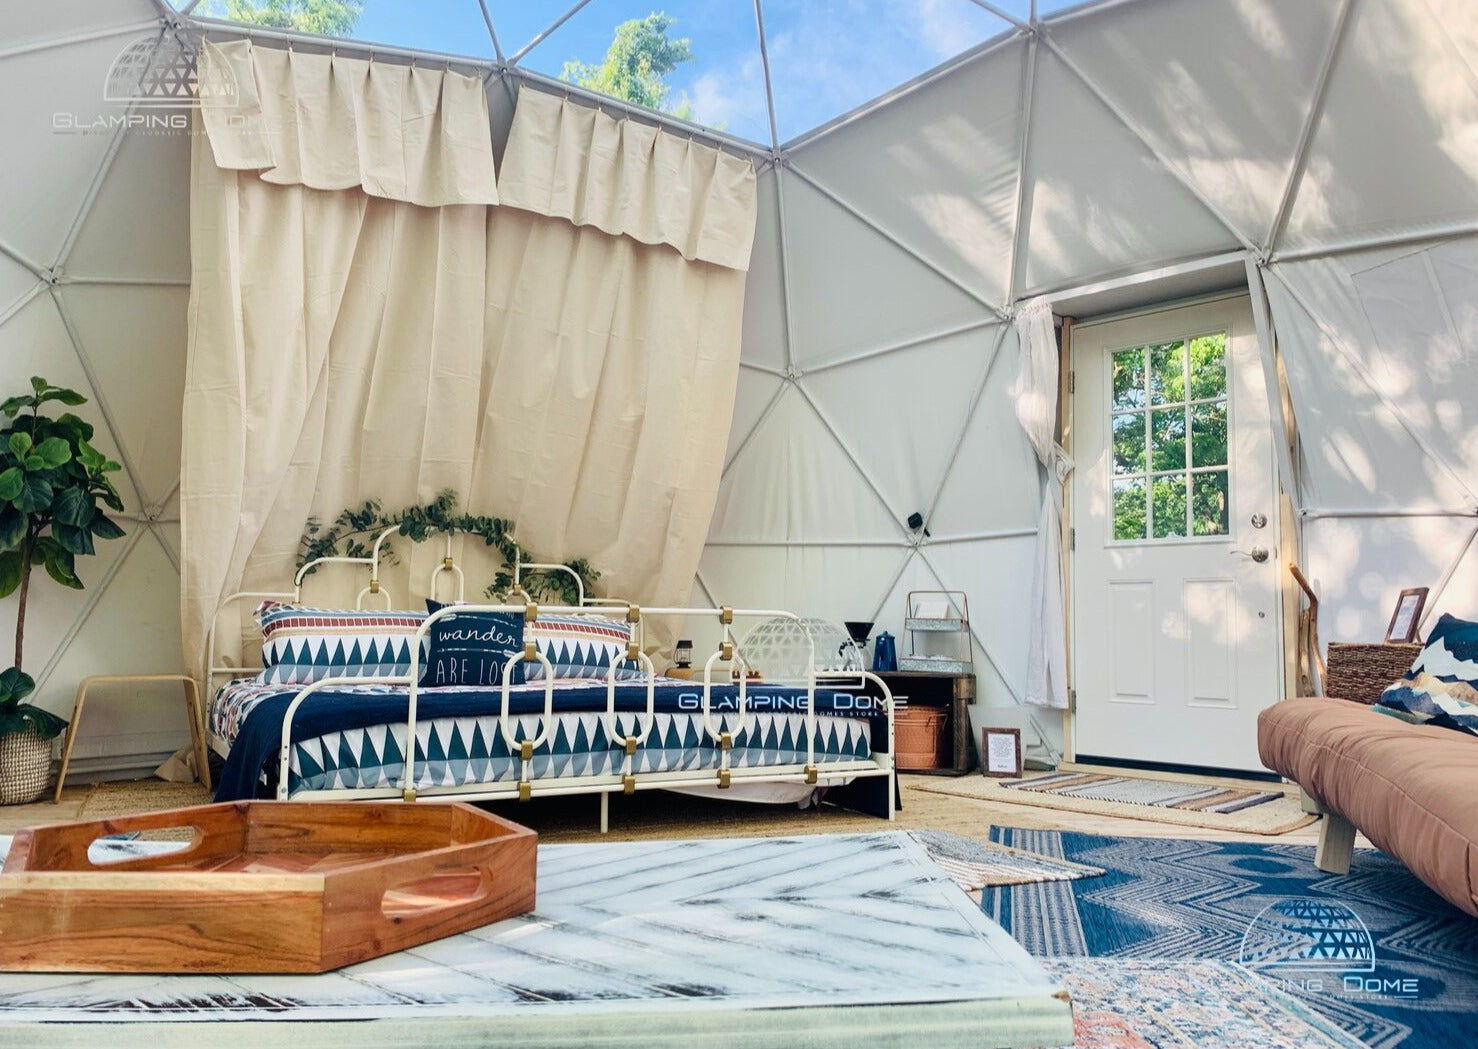 glamping dome interior bedroom